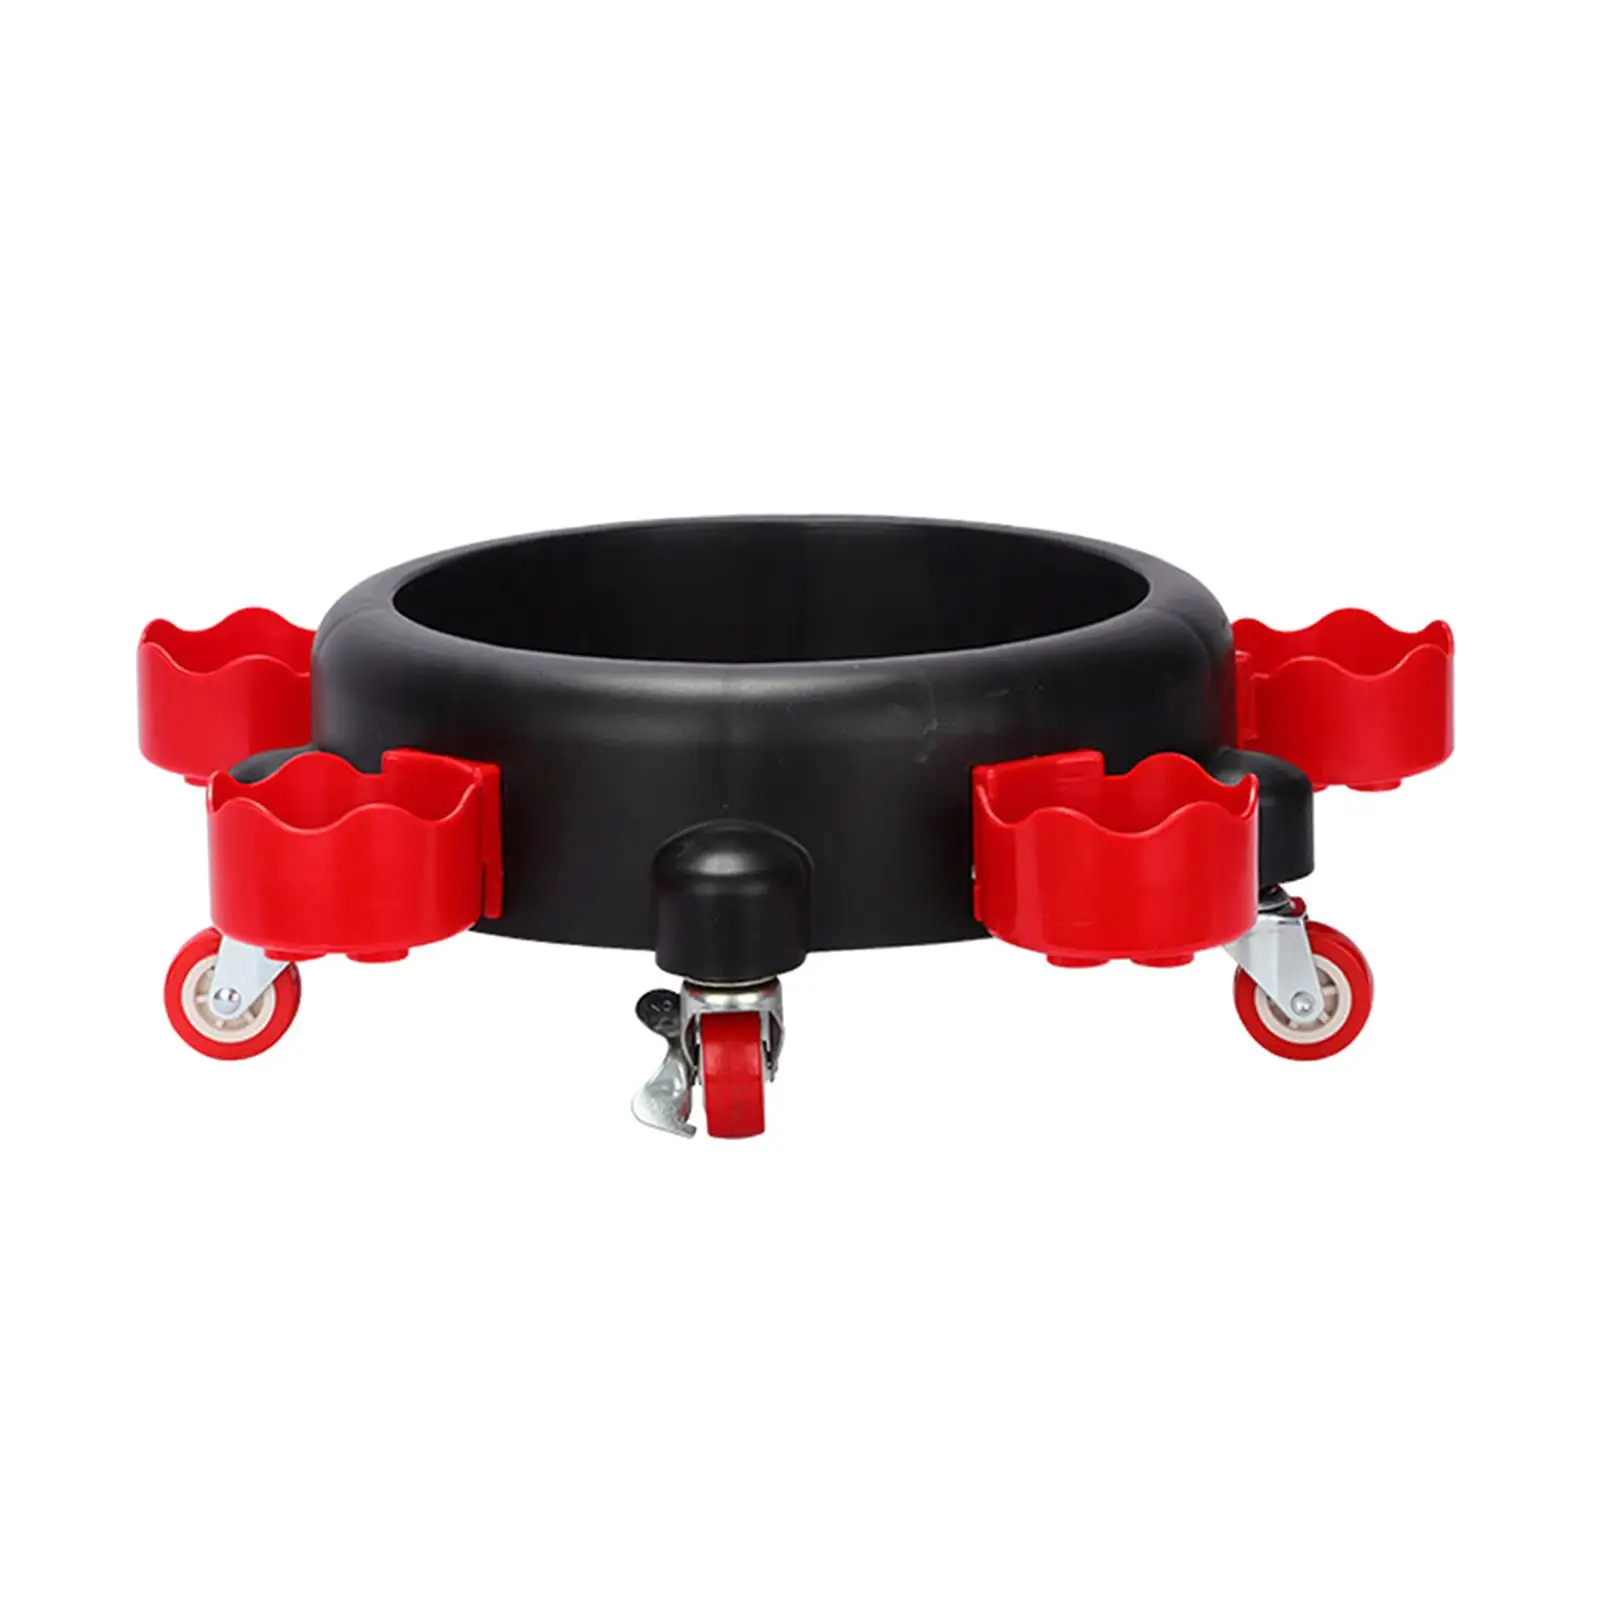 Rolling Bucket Dolly Heavy Duty Accessories Car Wash Bucket Insert for Wash Detailing Caddy Car Washing Building Workers